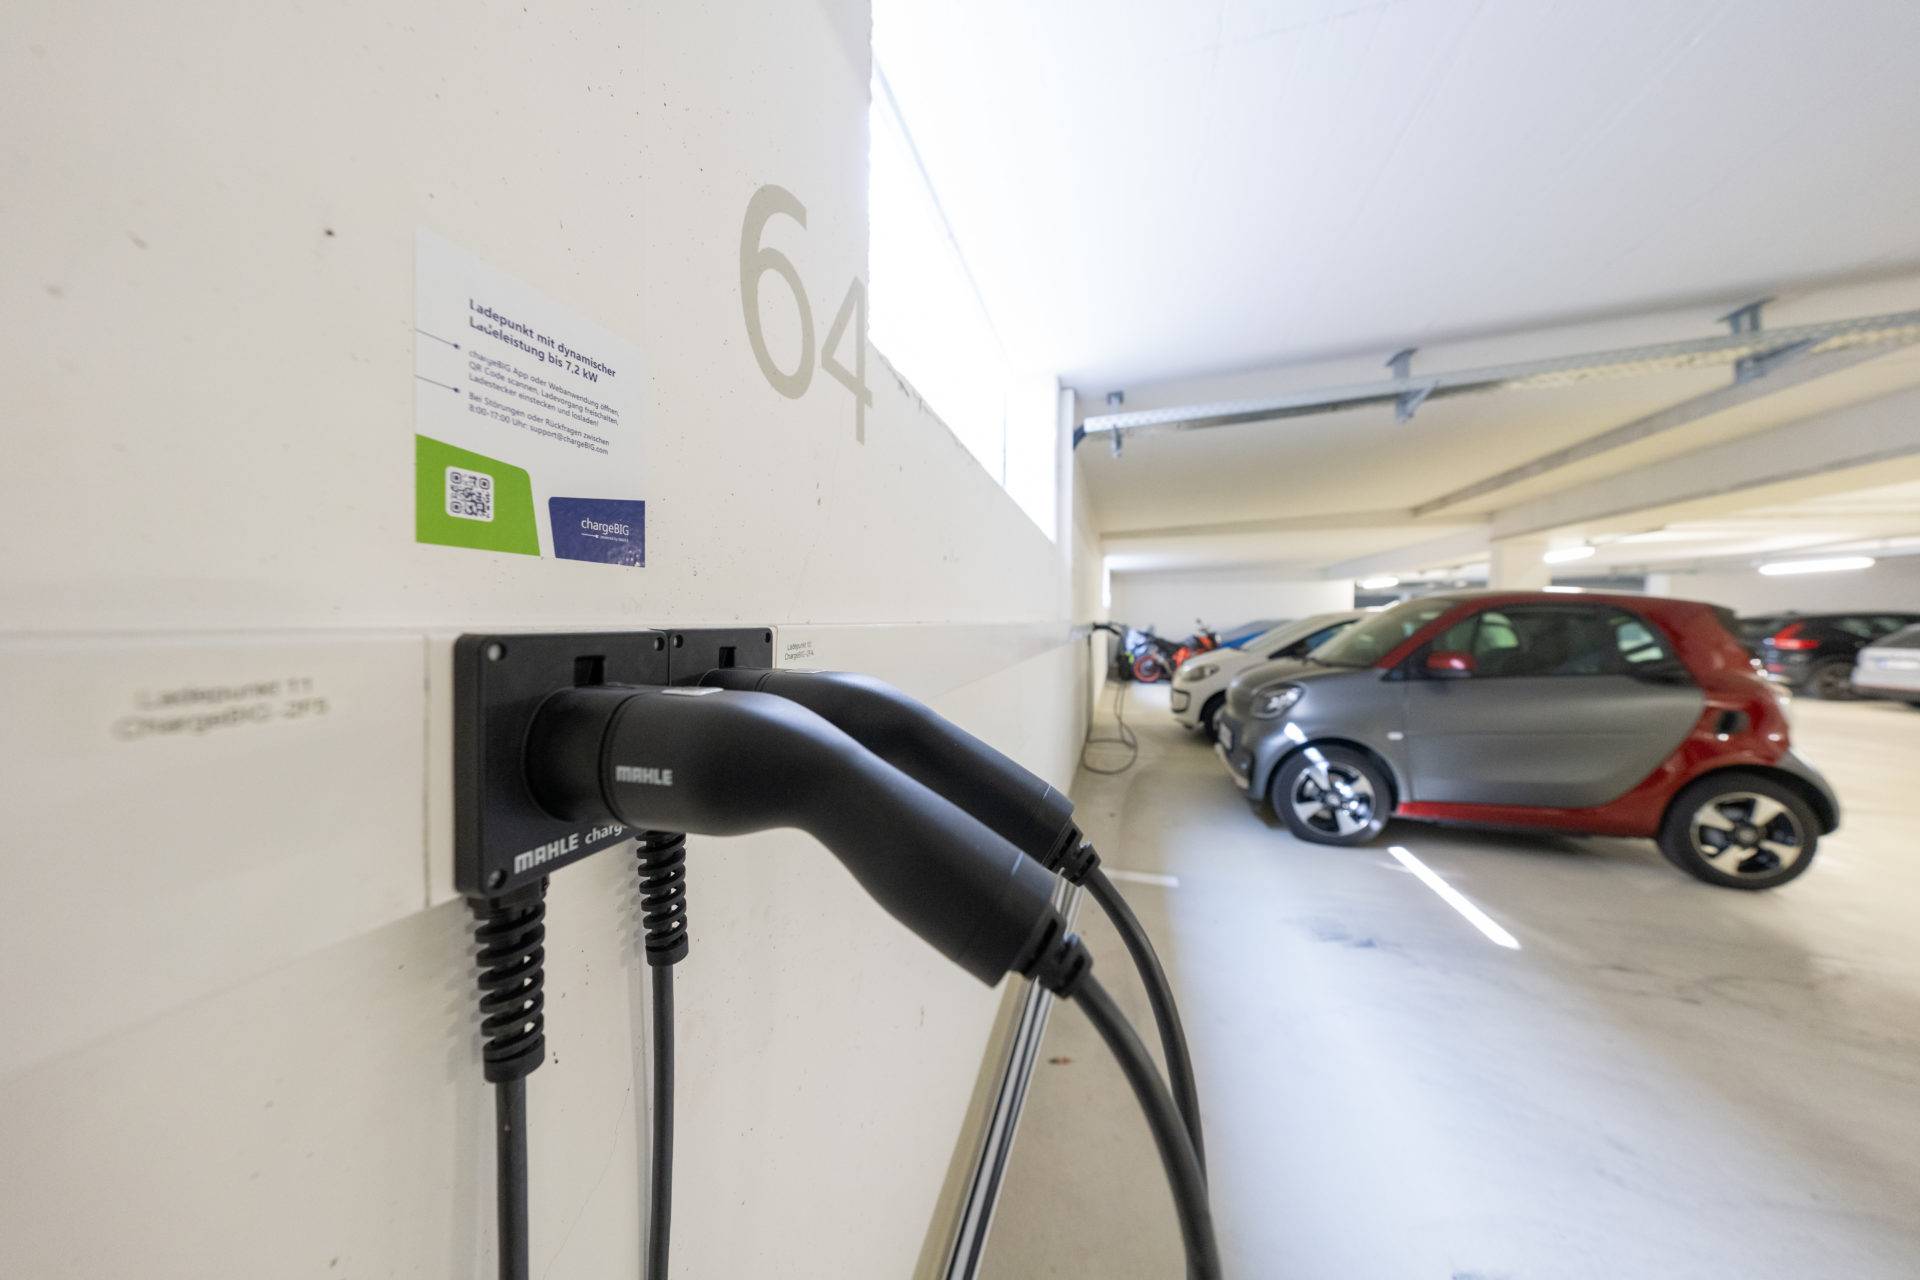 Retrofitting to Allow Electric Vehicle Charging for a Housing Association